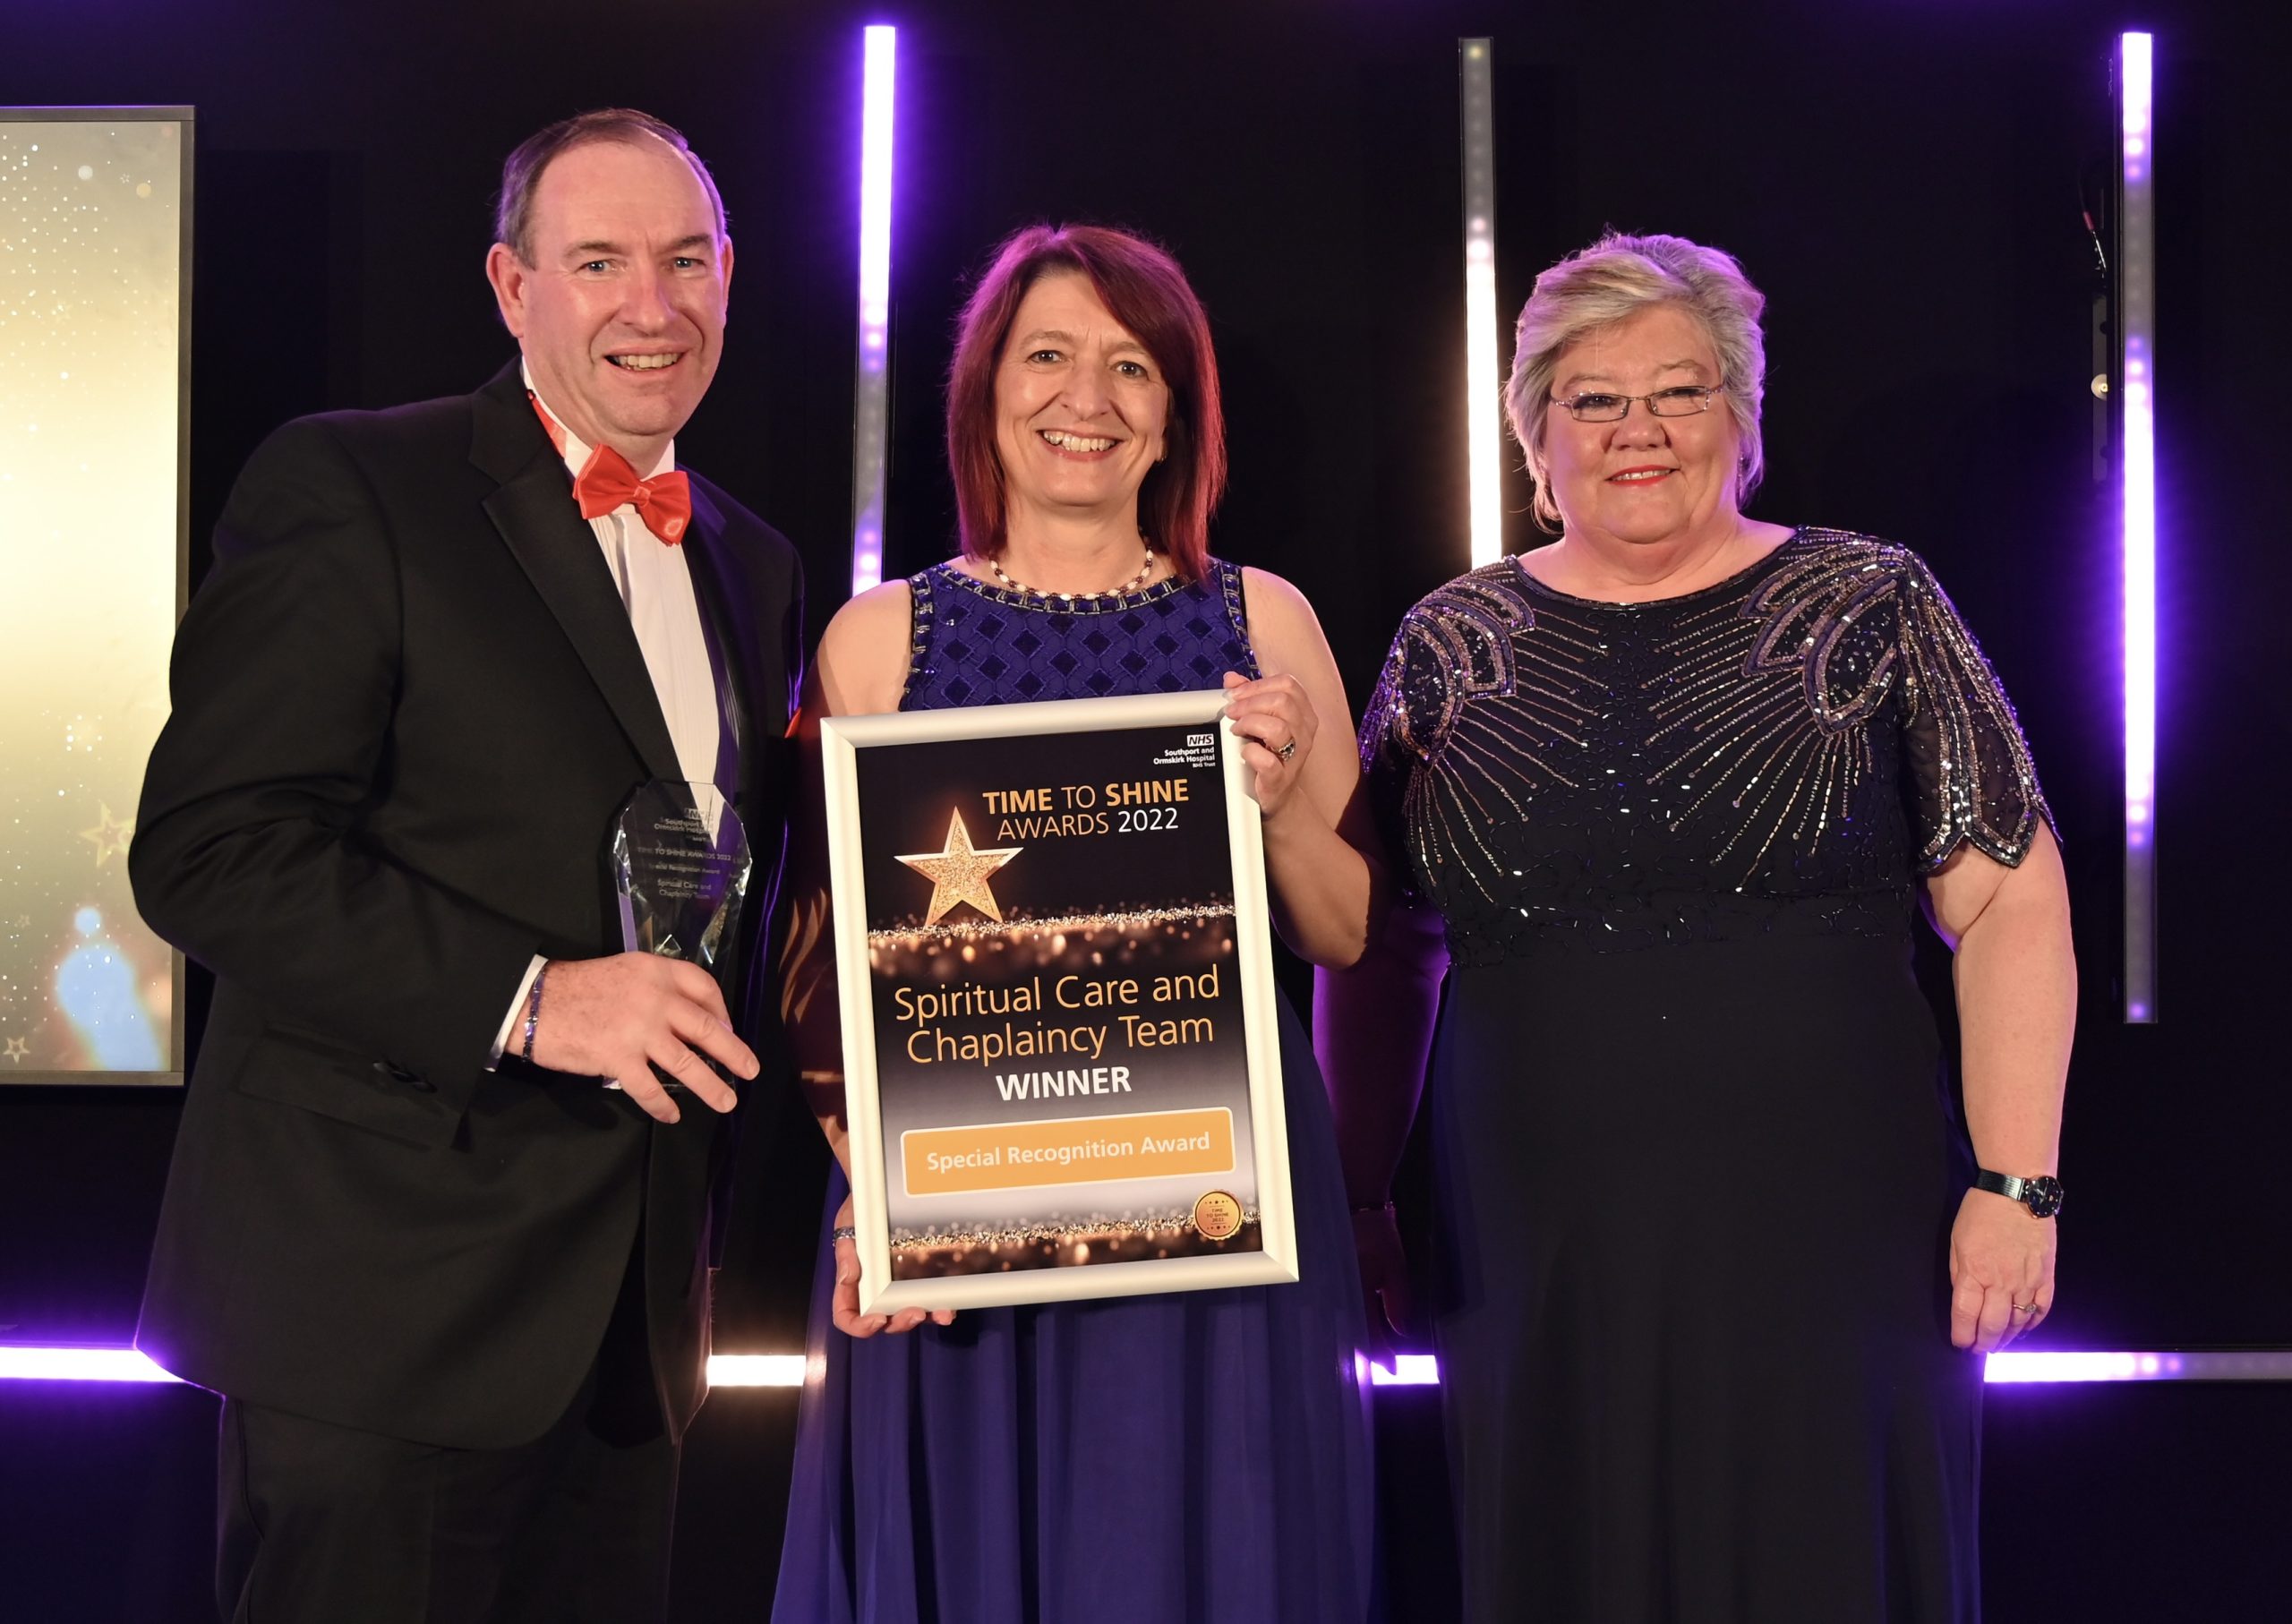 NHS heroes from across Southport and Ormskirk Hospital NHS Trust have been honoured at the 2022 Time to Shine Awards. The Spiritual Care and Chaplaincy Team won The Special Recognition Award